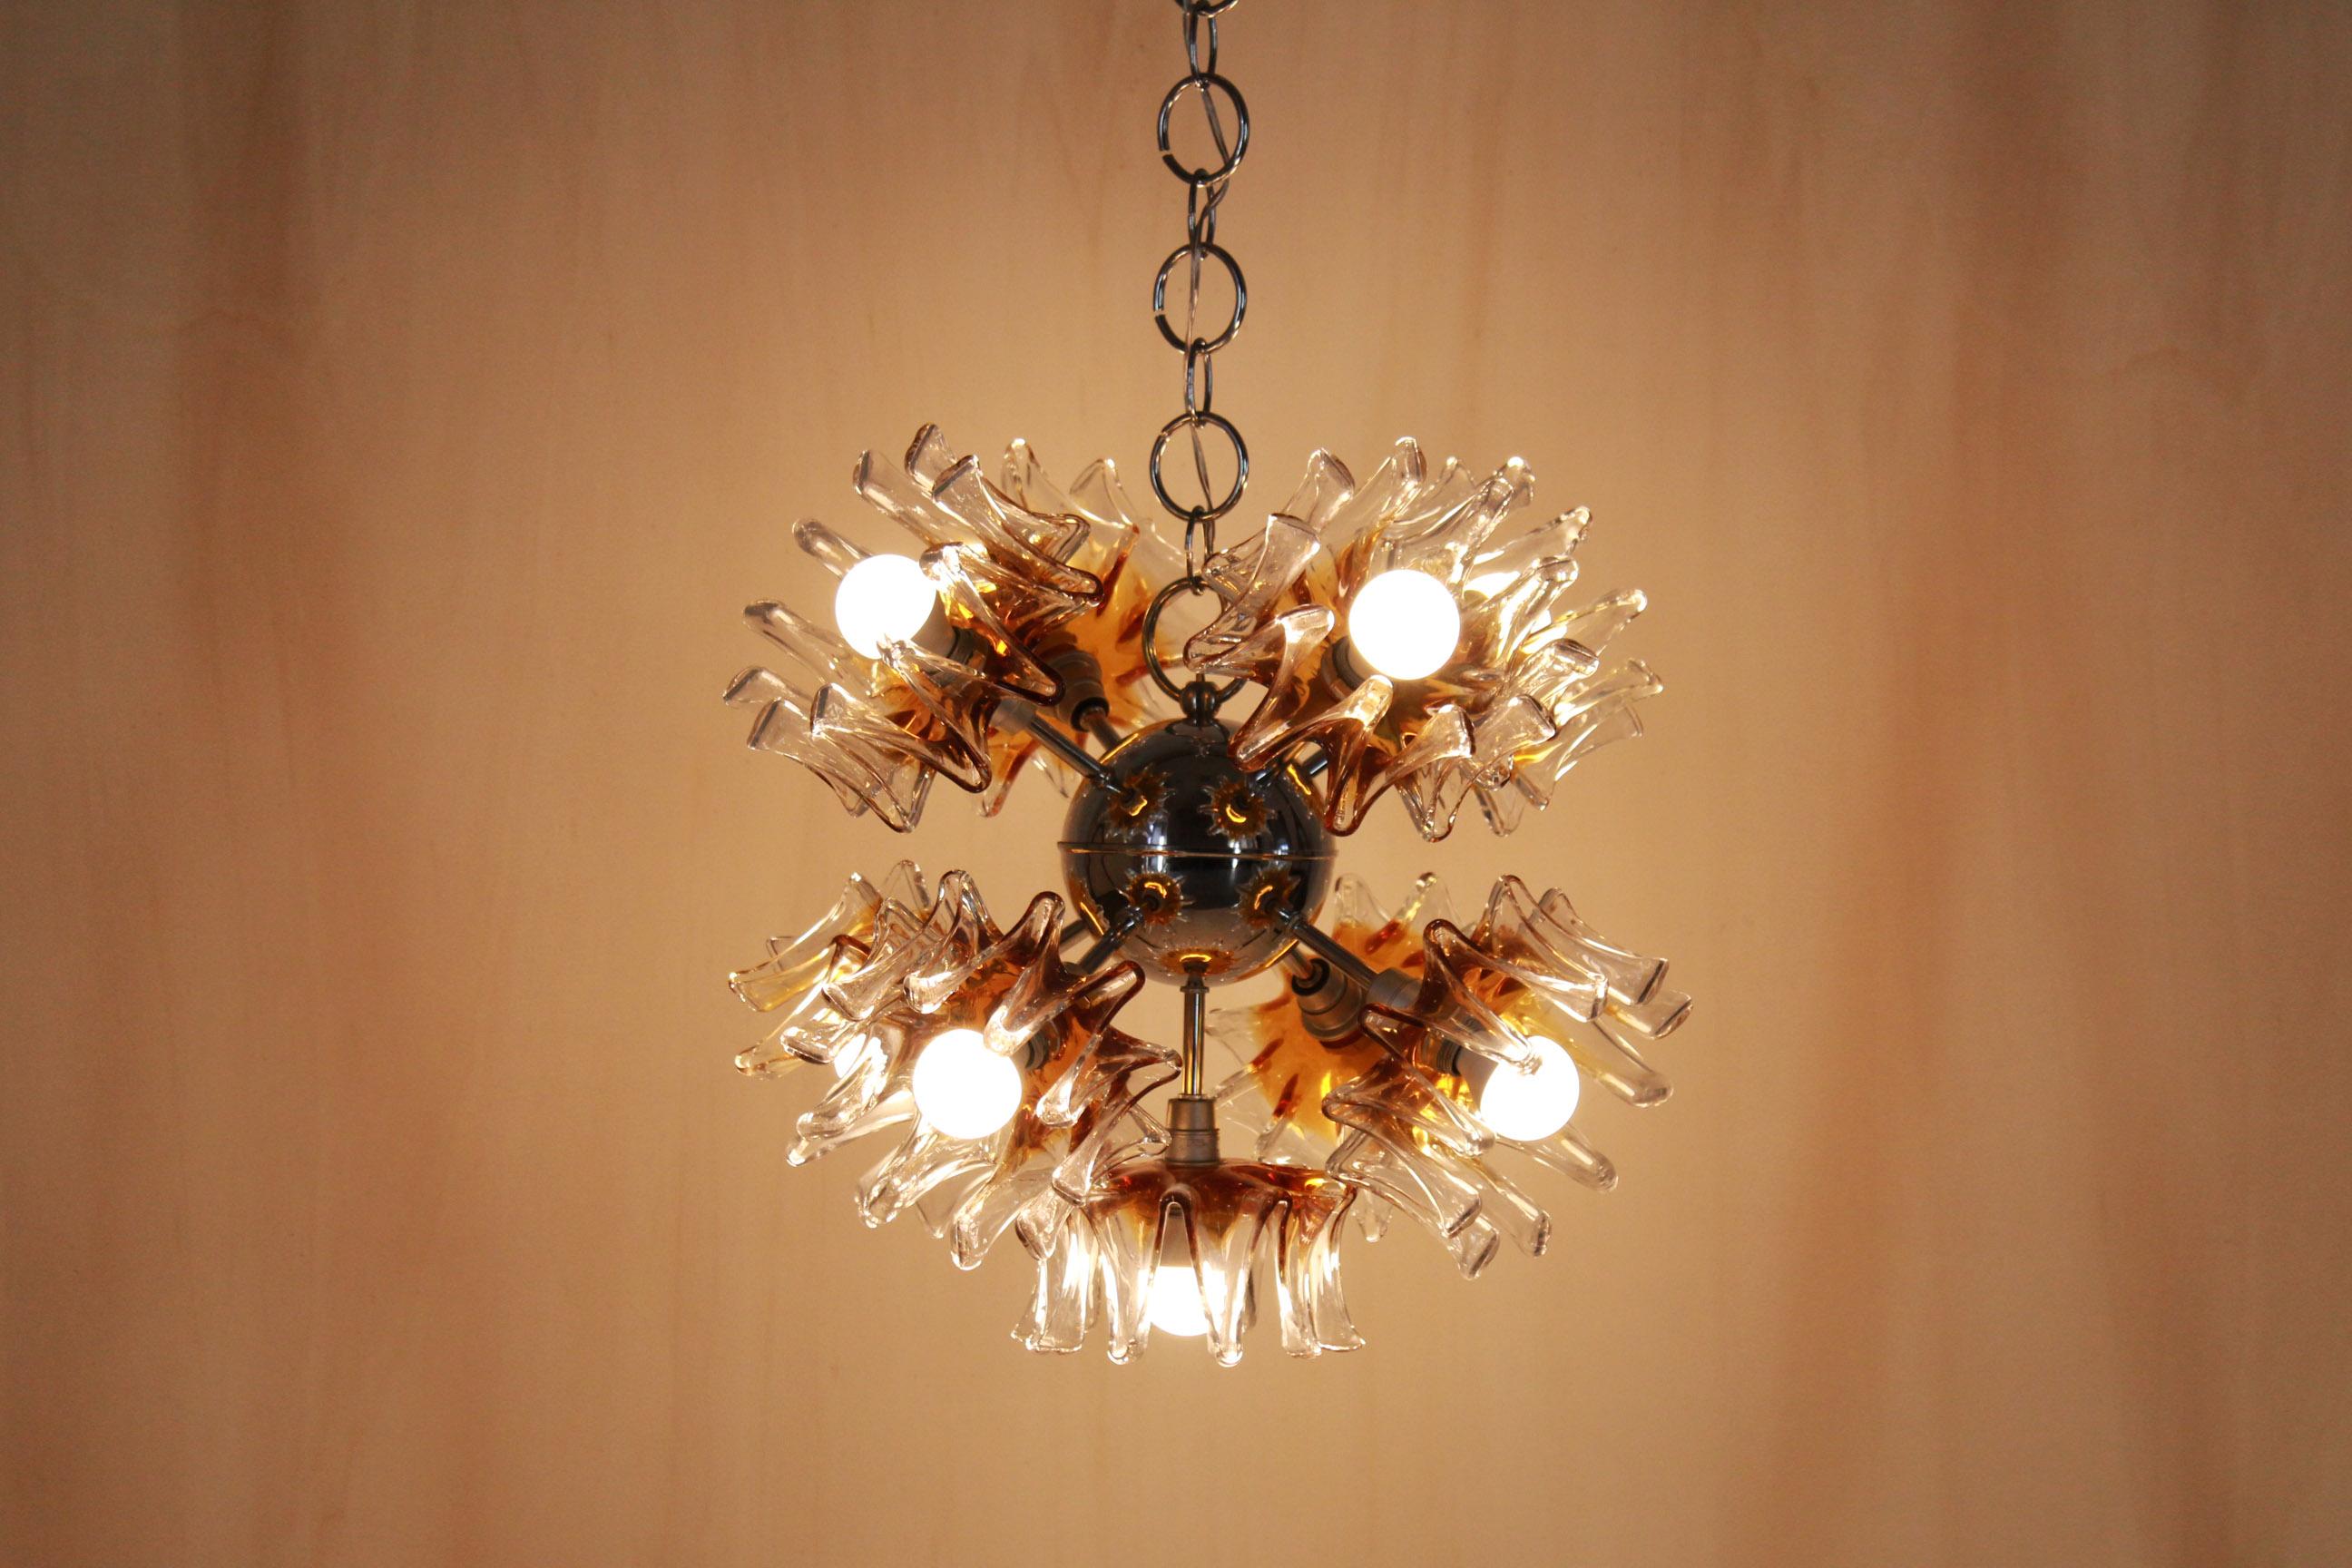 Vintage  SputnikChandelier in Murano Glass, Carlo Nason for Mazzega, Italy 1970s.
A Sputnik chandelier from the 1970s composed by 10 lights system with chromed iron structure and murano glass globe lights. Item in excellent conditions and fully